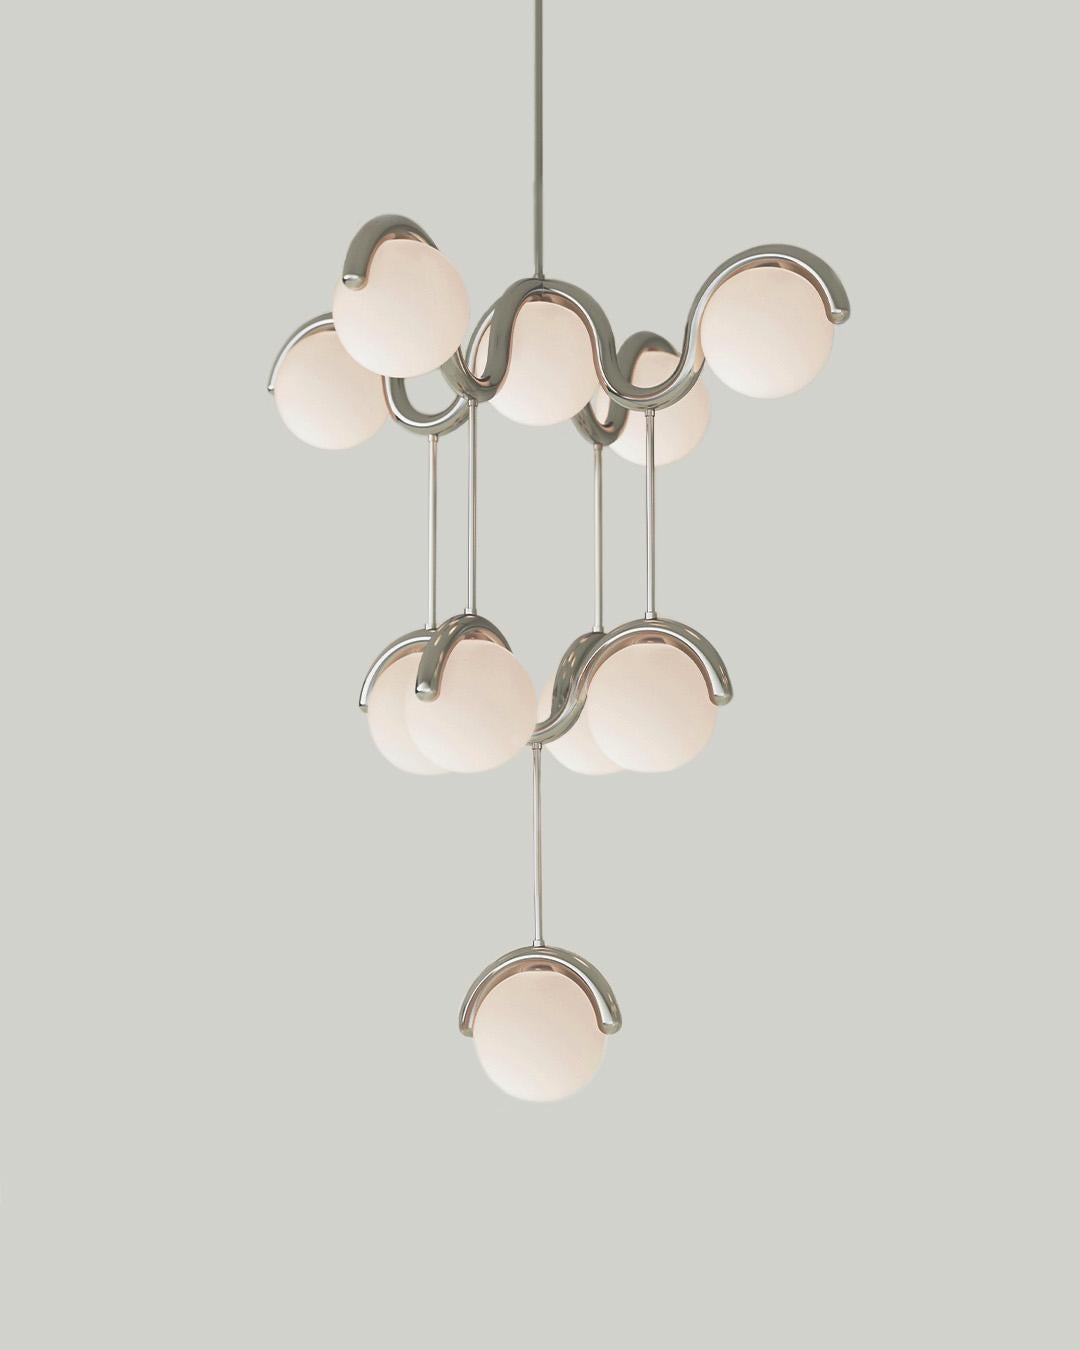 The scalloped design of the Lenox series was inspired by walks through Greenwich Village. A sophisticated and modern take on Art Nouveau, the metal tube bends around the shape of the globe light, creating a flow of movement and synchrony between the